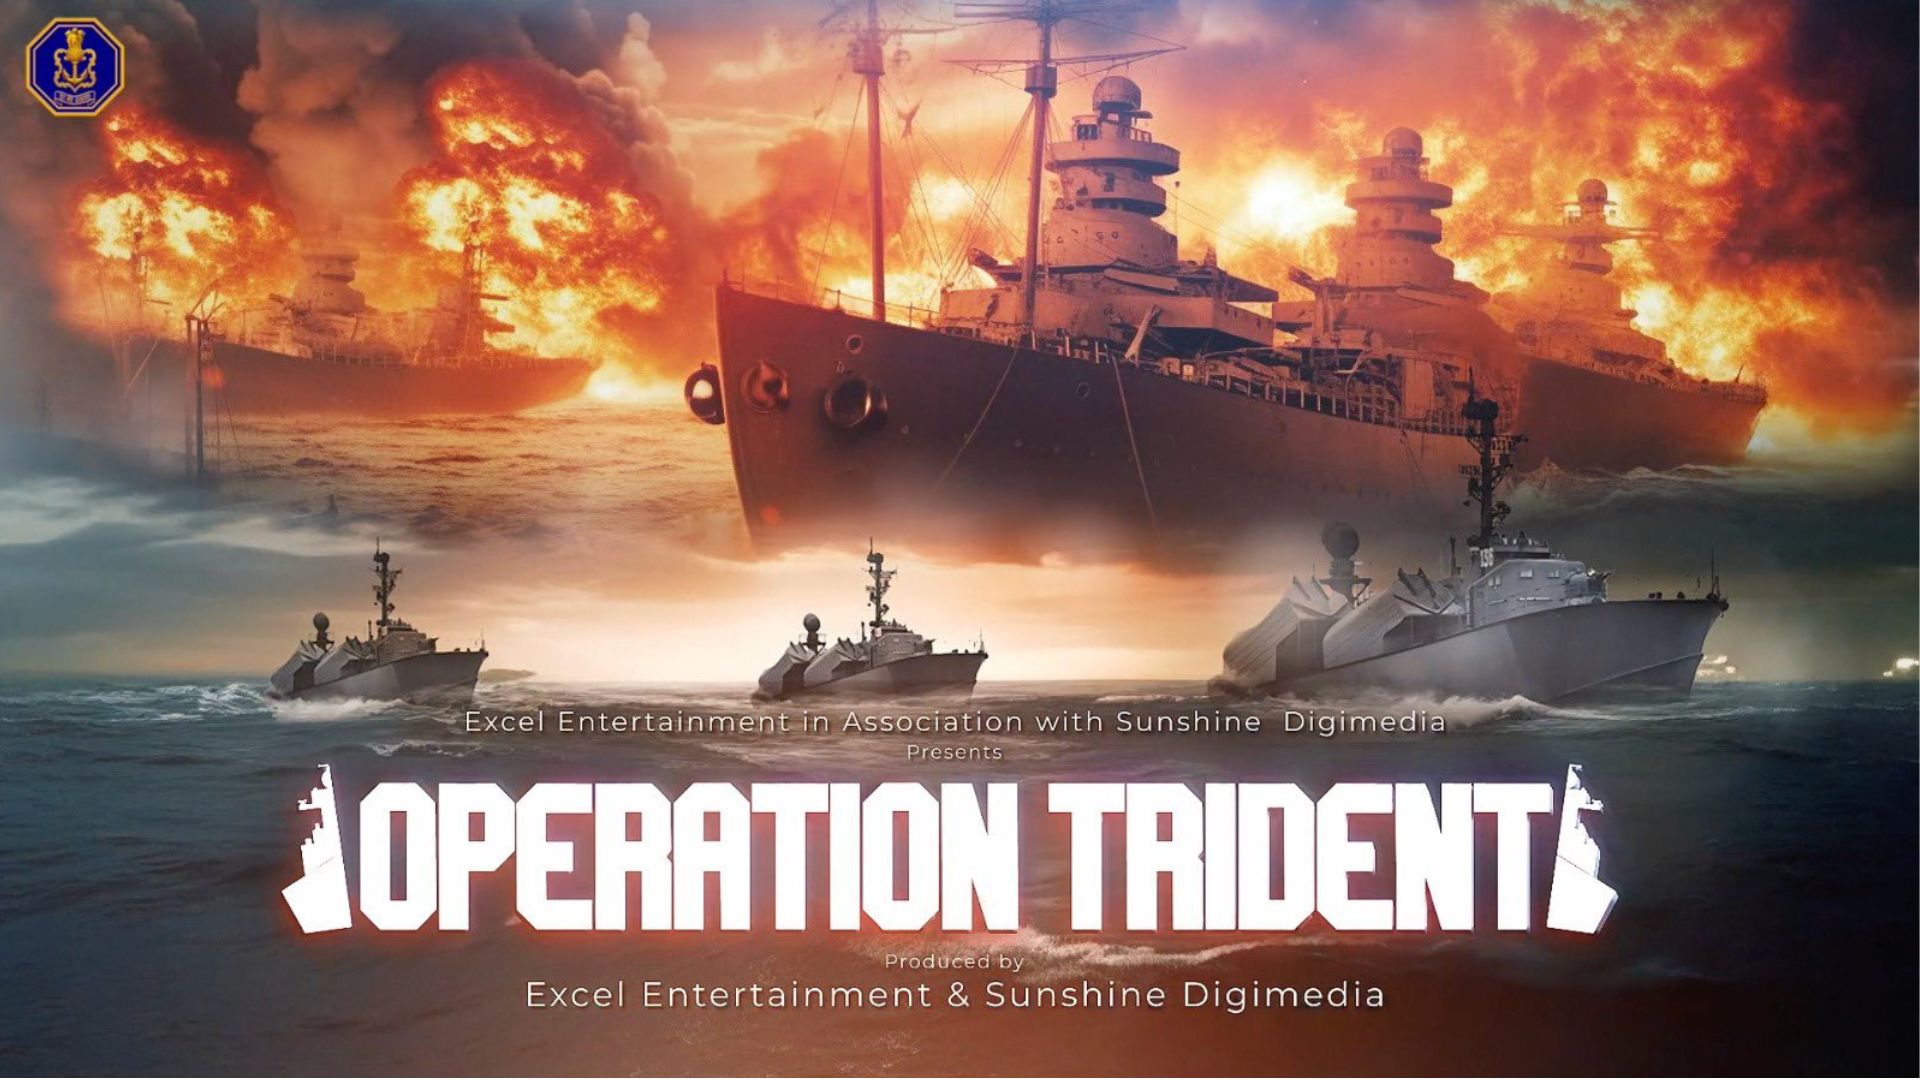 Ritesh Sidhwani and Farhan Akhtar led Excel Entertainment has officially announced their upcoming film "Operation Trident".